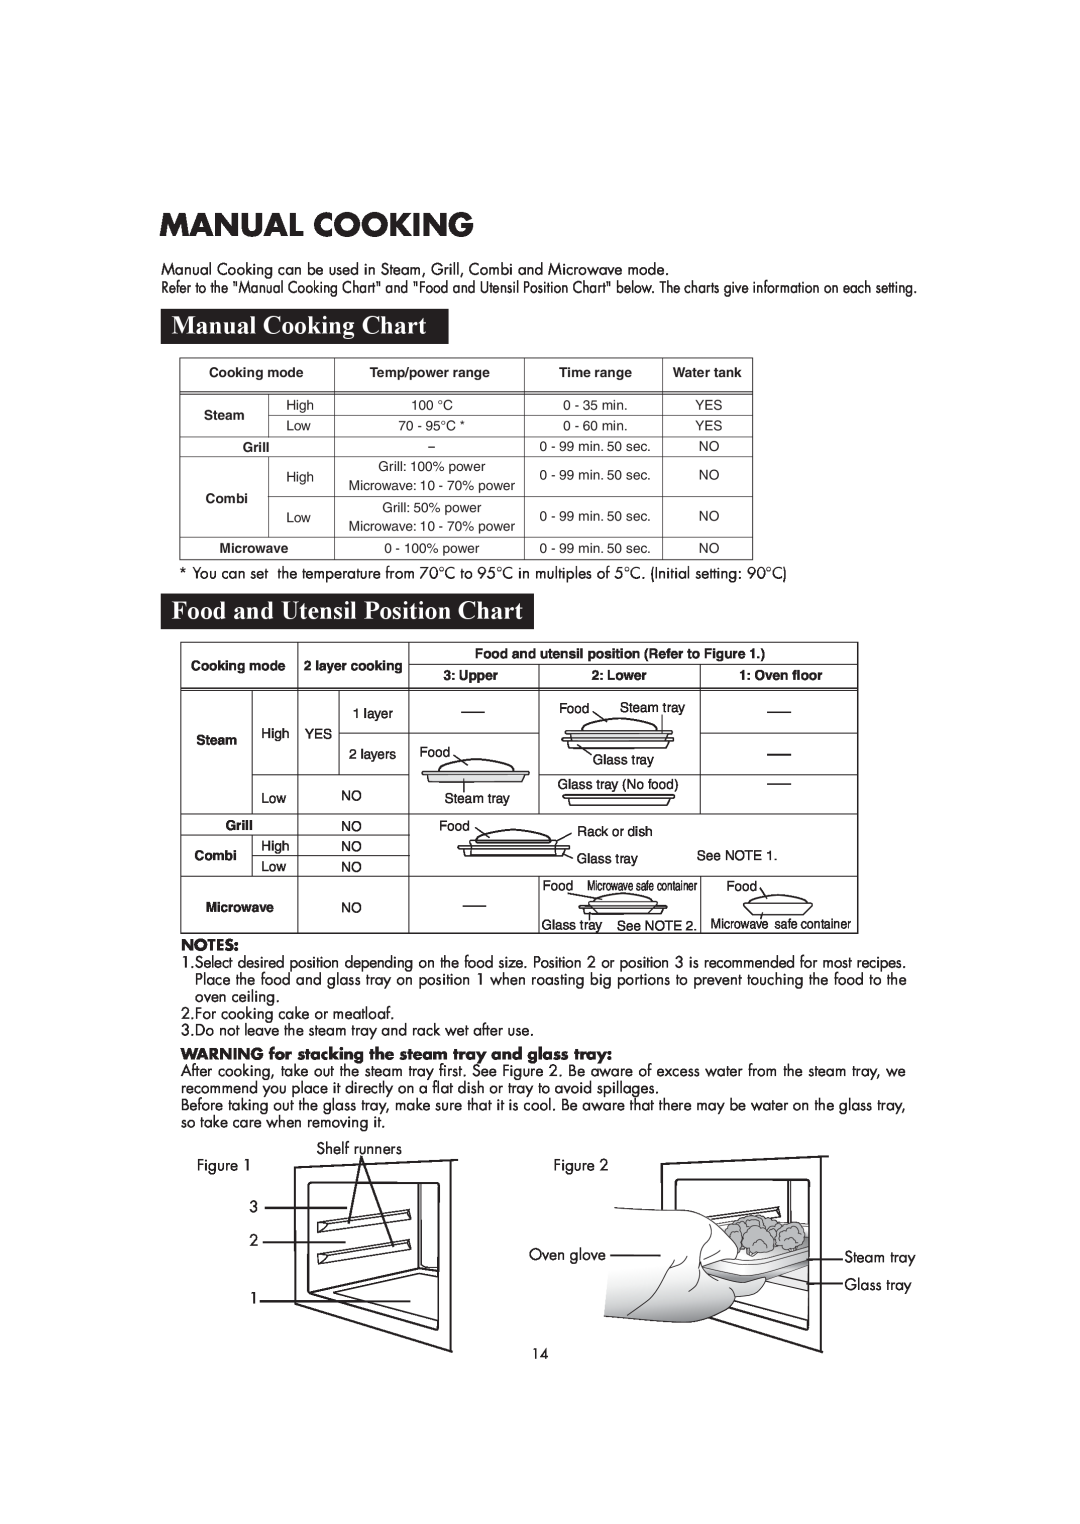 Sharp AX-1110(SL)M manual Manual Cooking Chart, Food and Utensil Position Chart 